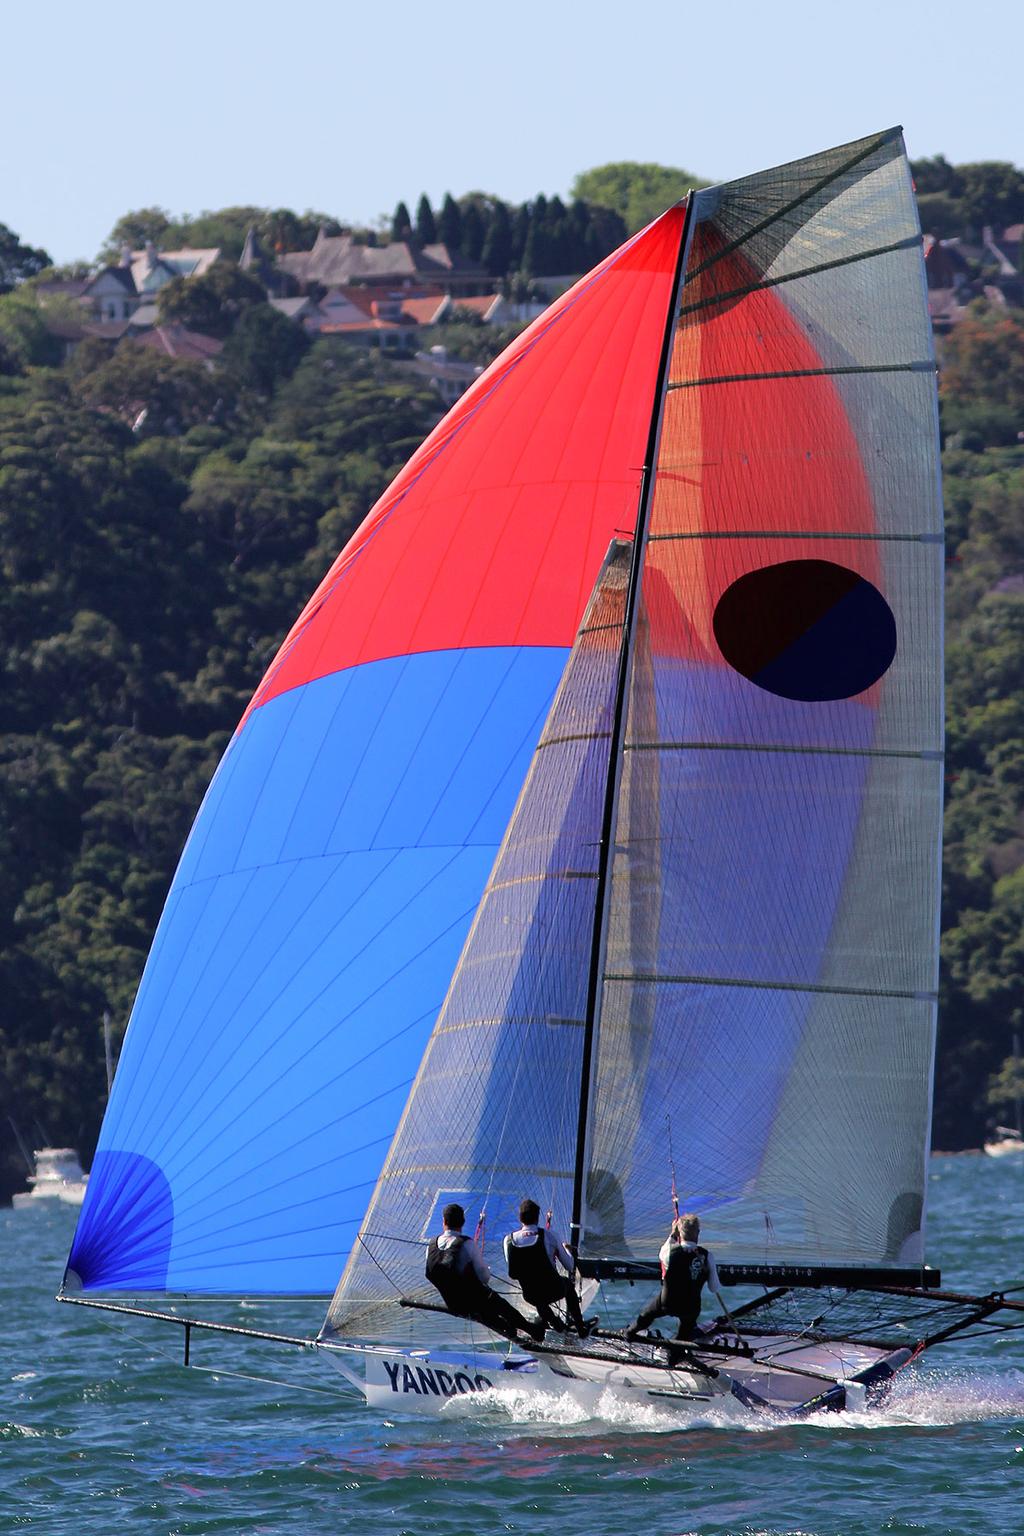 The experienced Yandoo crew too good in South East wind - 18ft Skiffs: Mick Scully Memorial Trophy 2014 © Australian 18 Footers League http://www.18footers.com.au